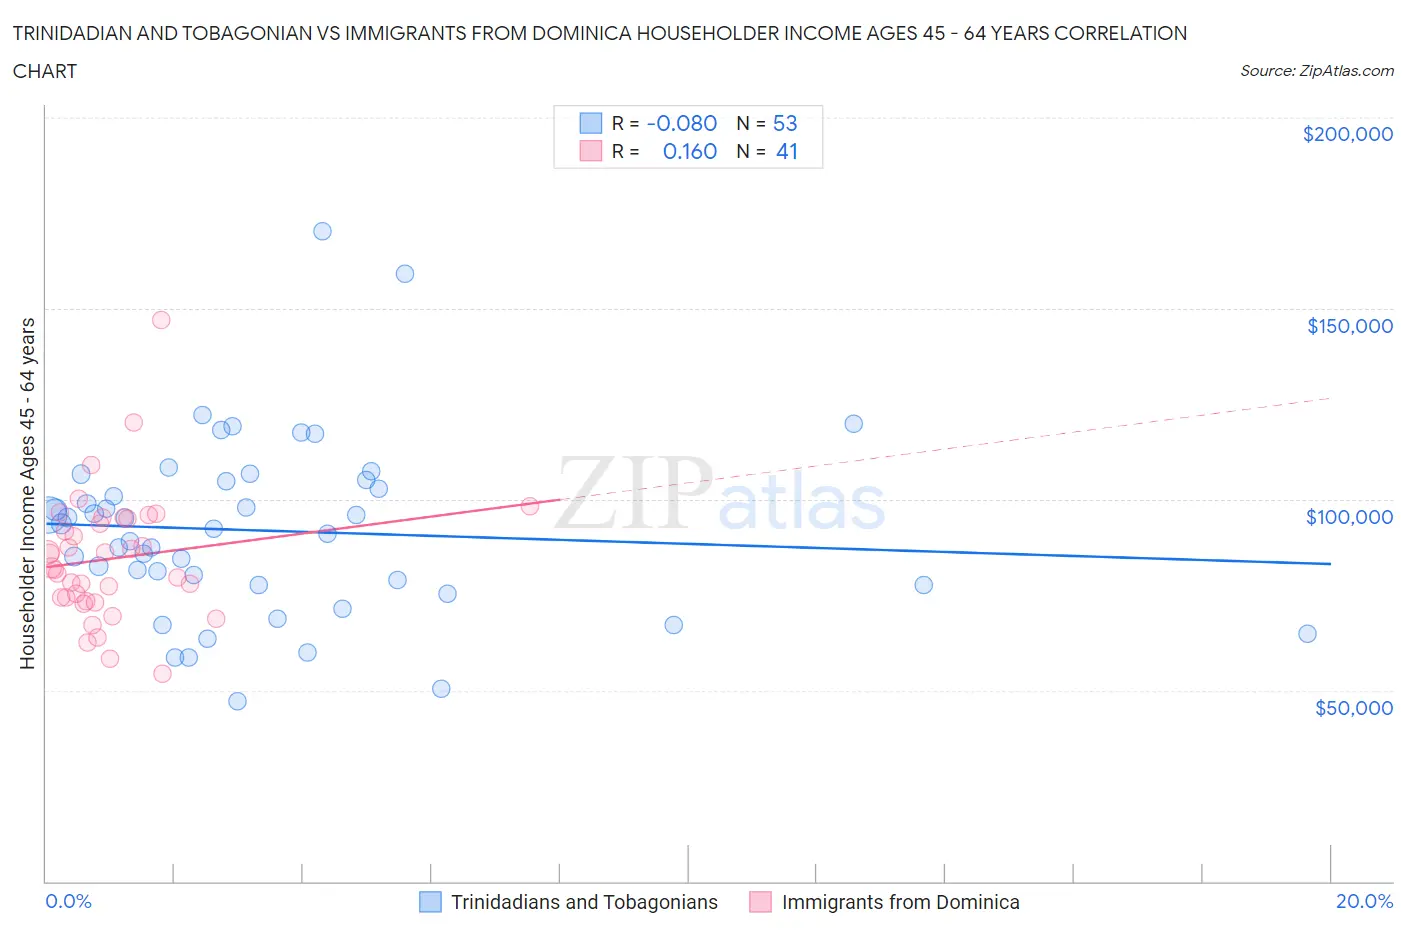 Trinidadian and Tobagonian vs Immigrants from Dominica Householder Income Ages 45 - 64 years